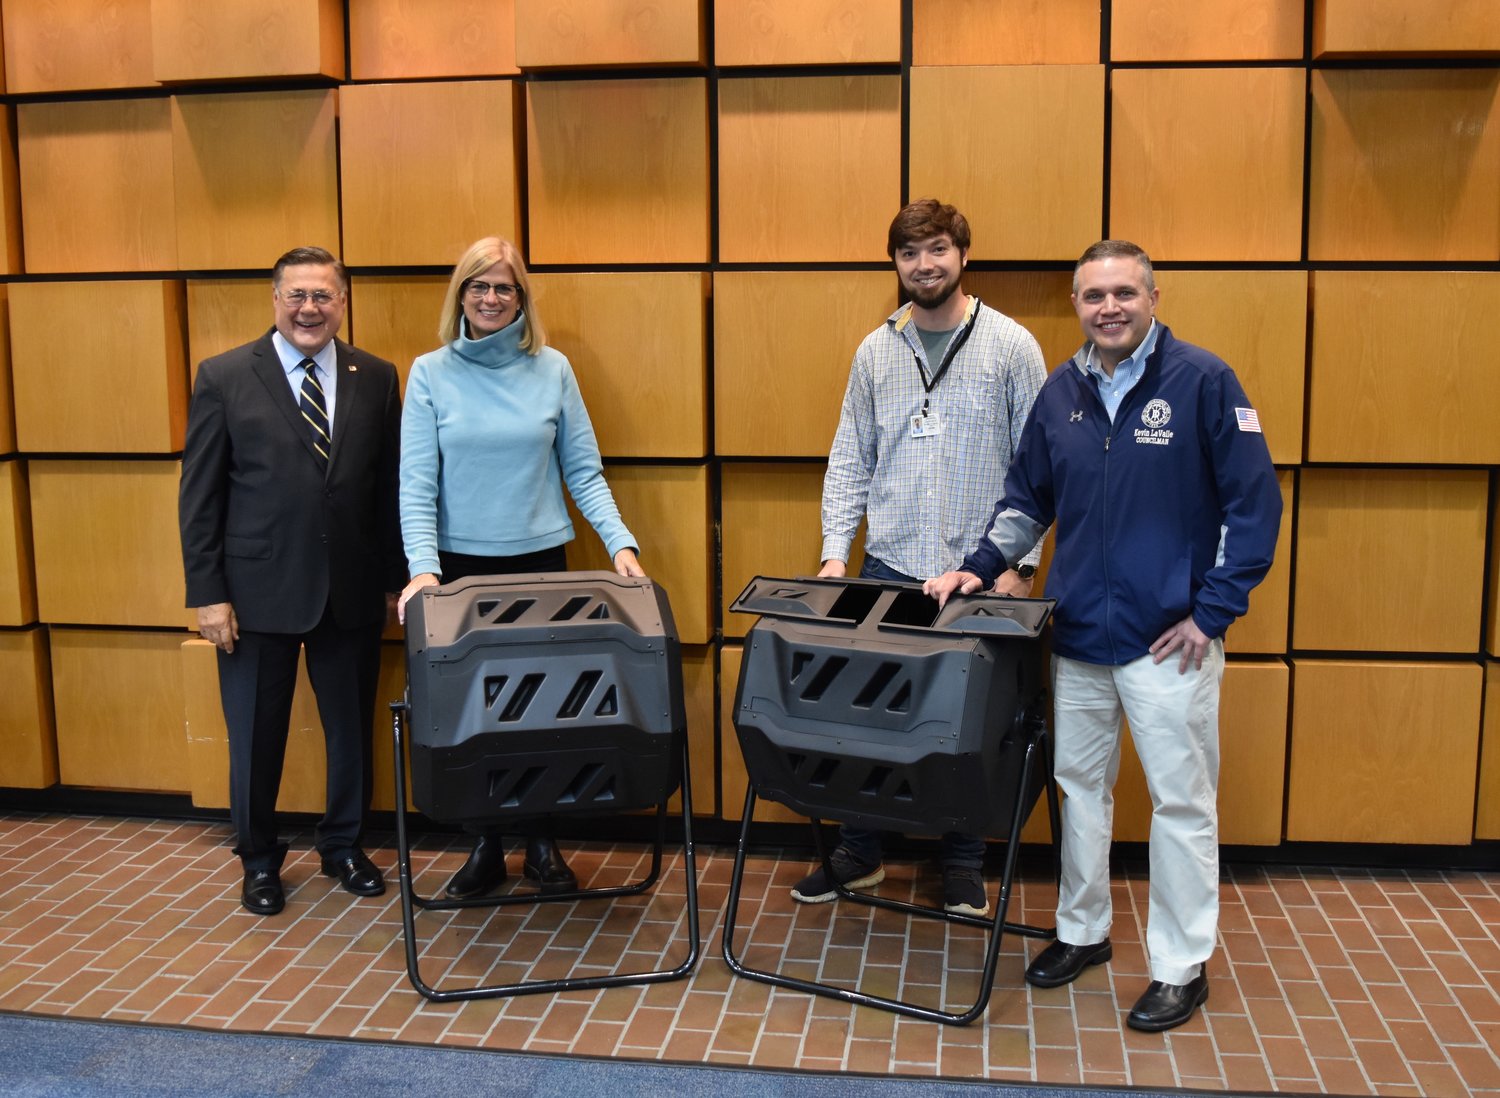 Pictured are (left to right) supervisor Ed Romaine; councilwoman Jane Bonner; town recycling coordinator, Zachary Sicardi; and councilman Kevin LaValle.